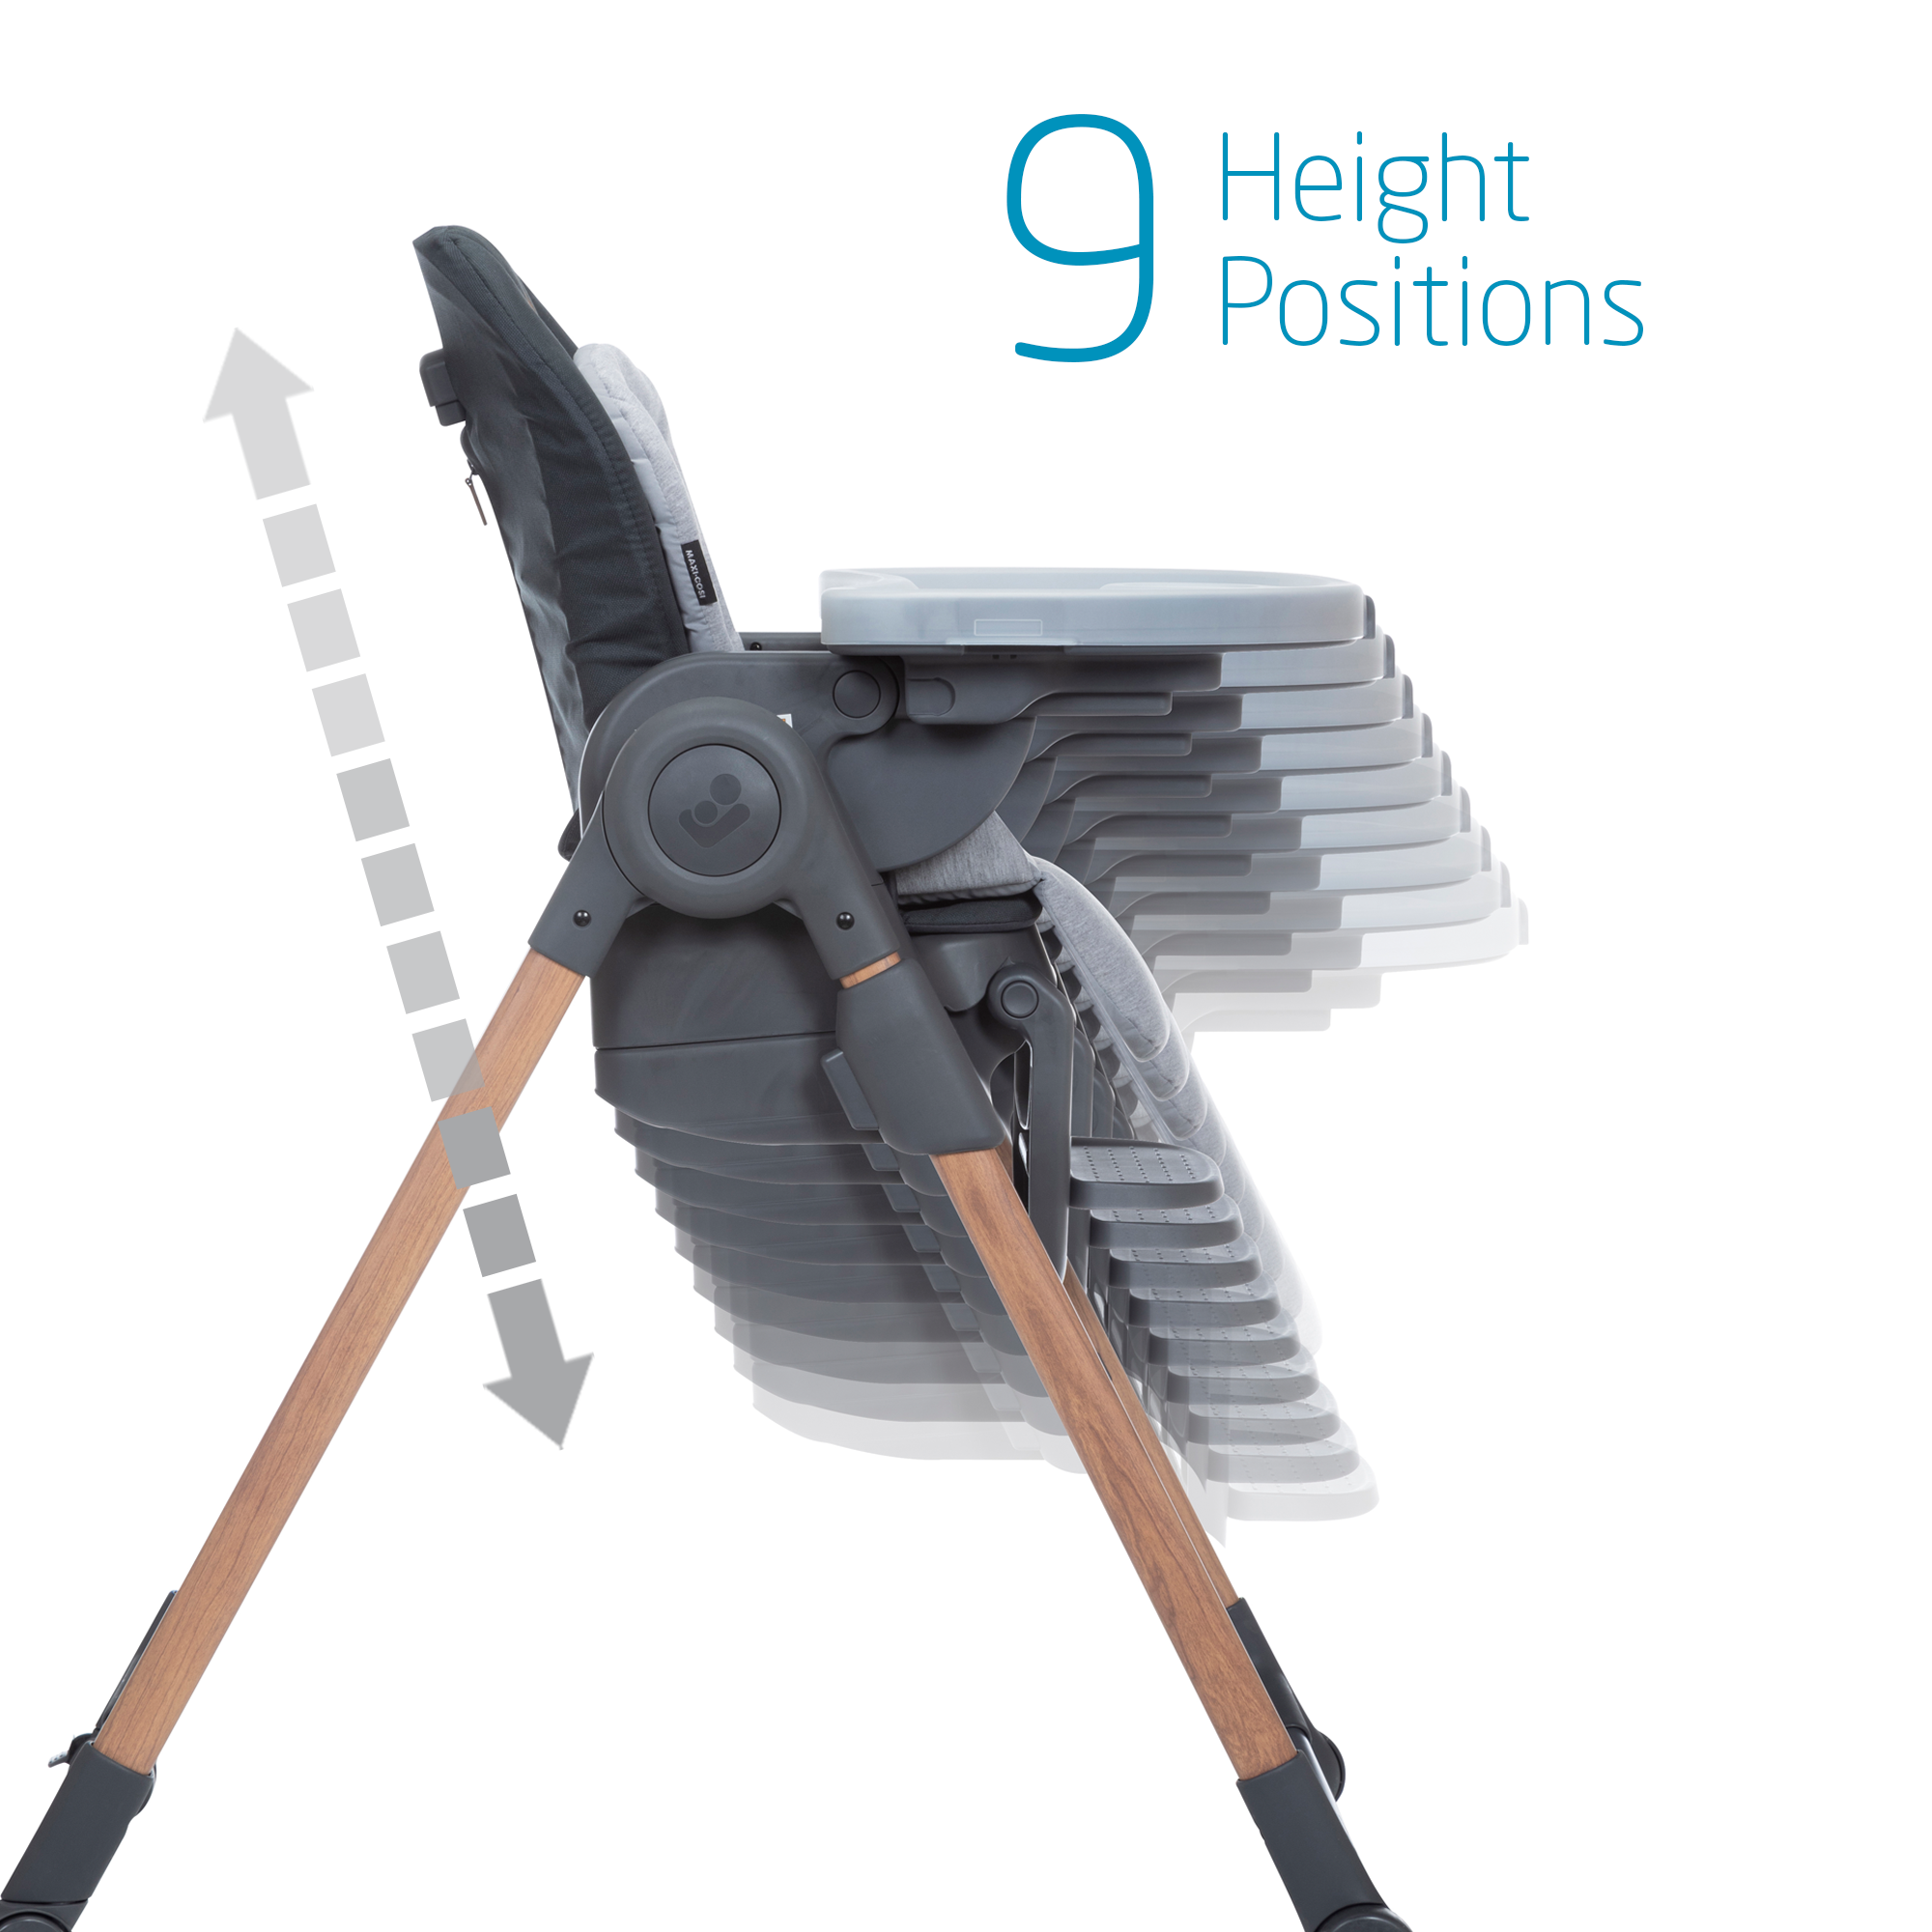 9 Height positions